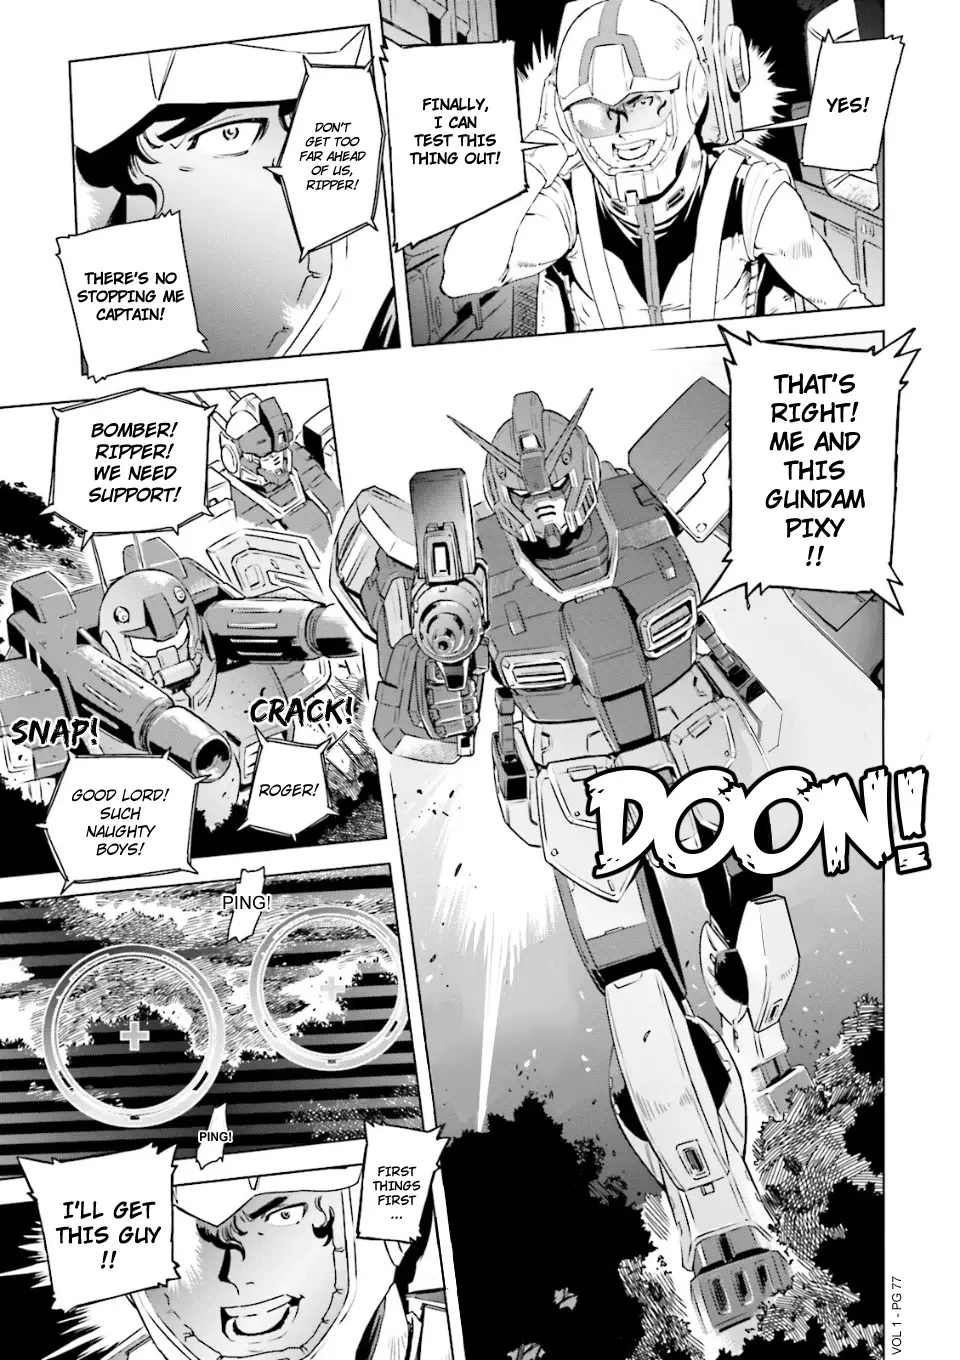 Mobile Suit Gundam Side Story - Missing Link - 3 page 11-55f5f77e